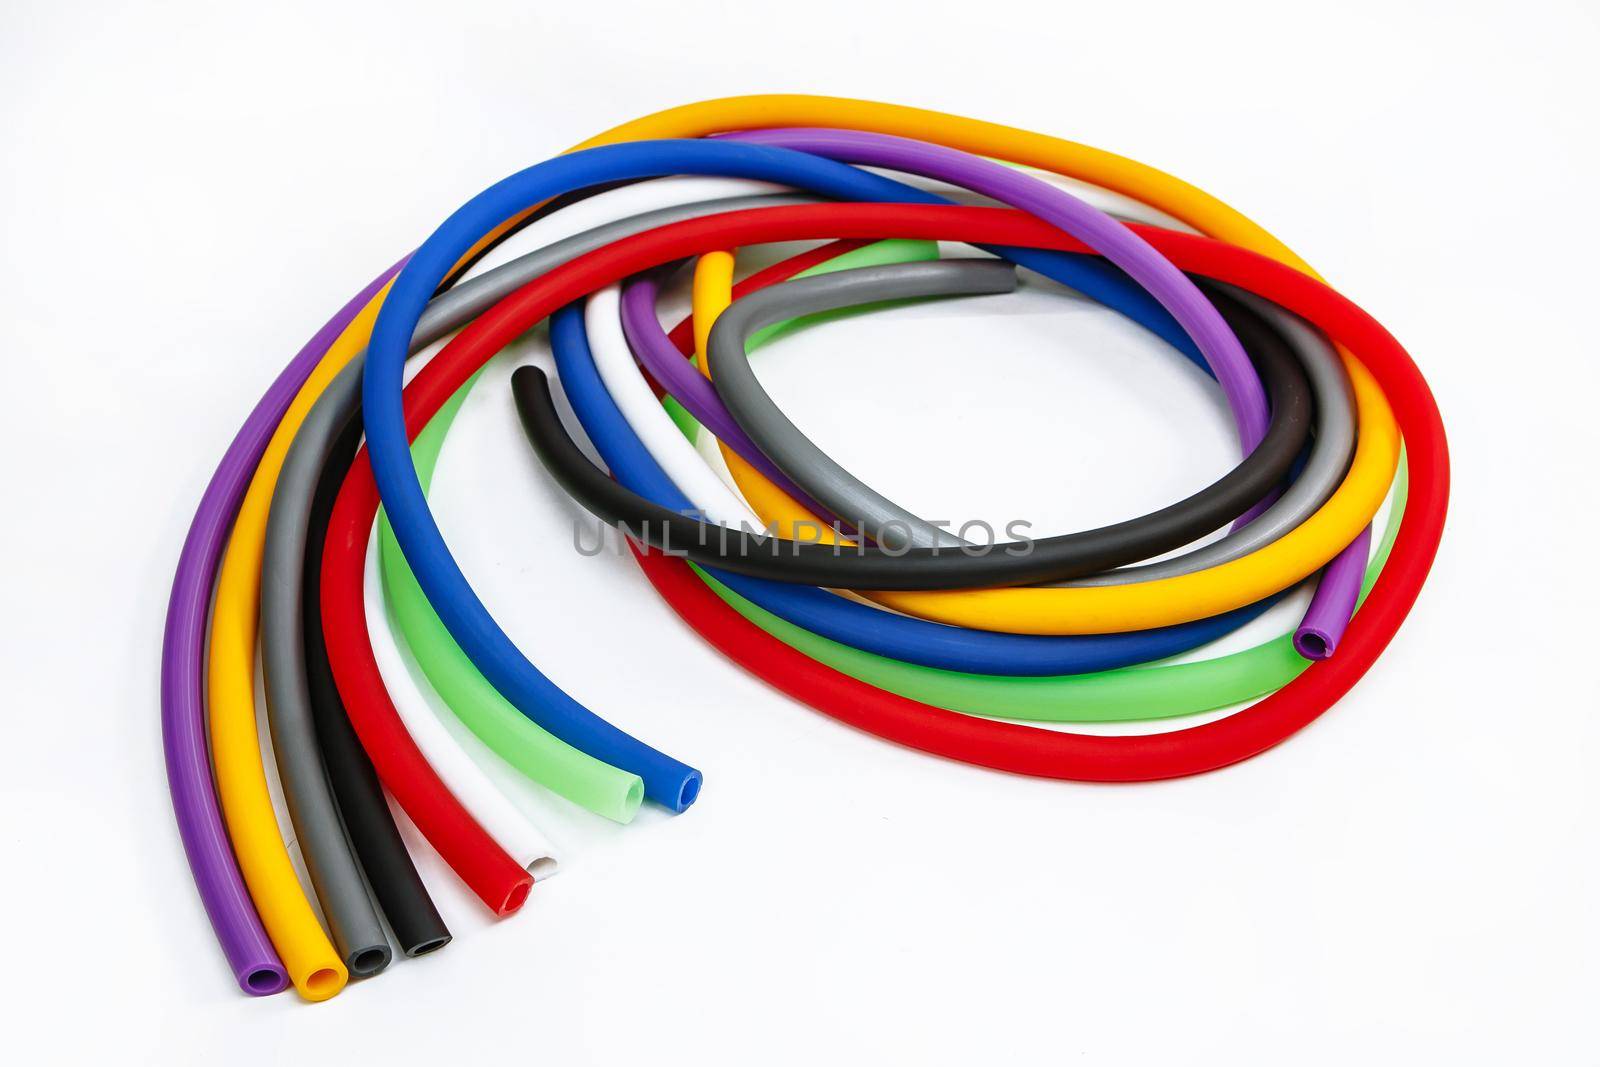 Multi-colored rubber hoses for use in the form of hookah pipes.